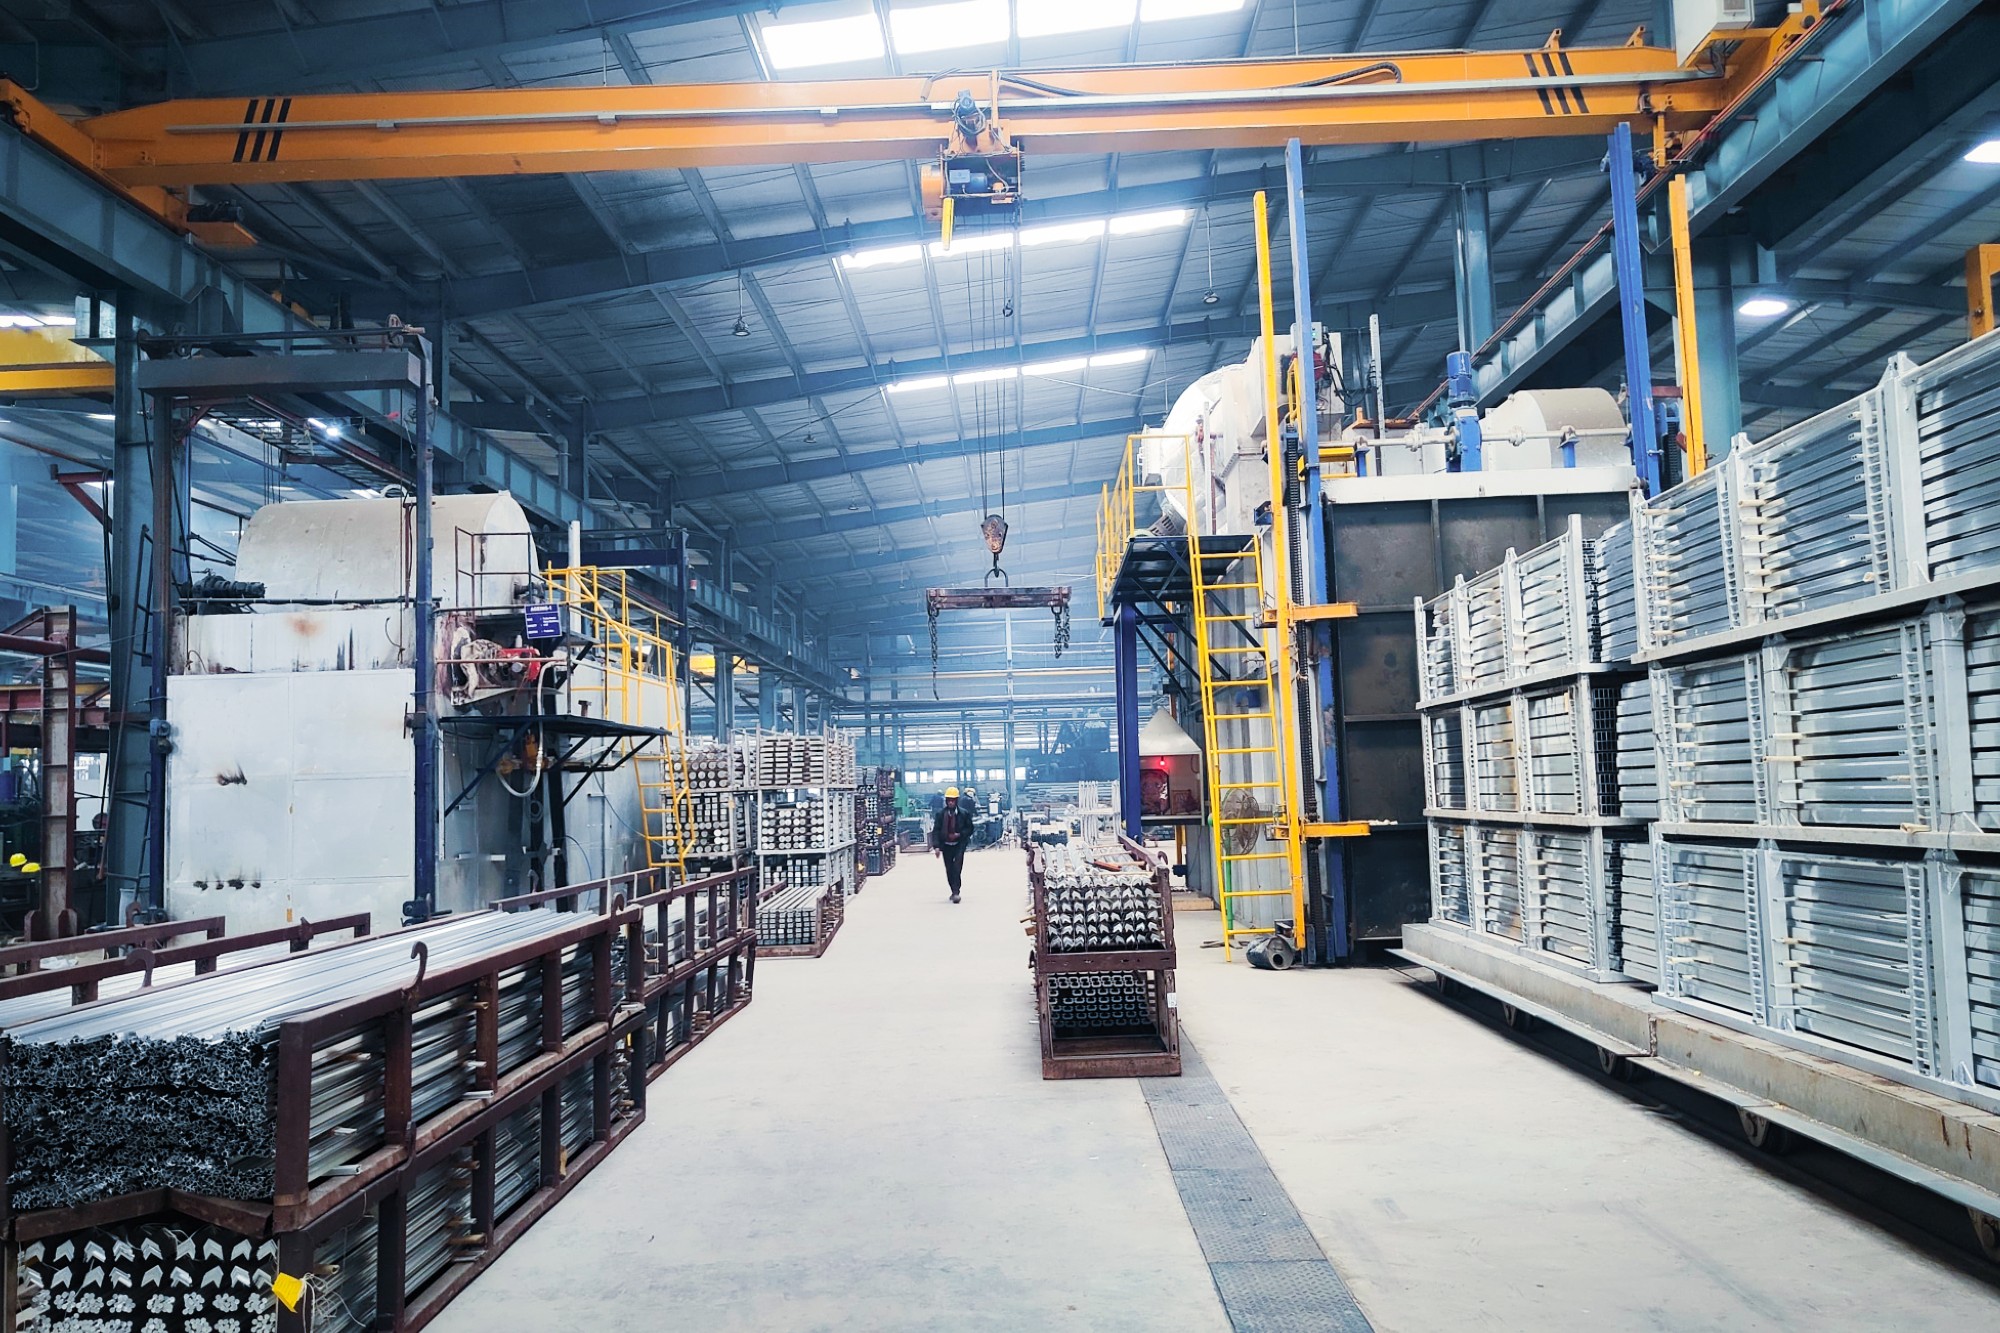 Celebrating its two-year milestone since the inception of operations in Bhiwadi, Jindal Aluminium Limited, India's premier producer of aluminium extruded products, marks a significant achievement